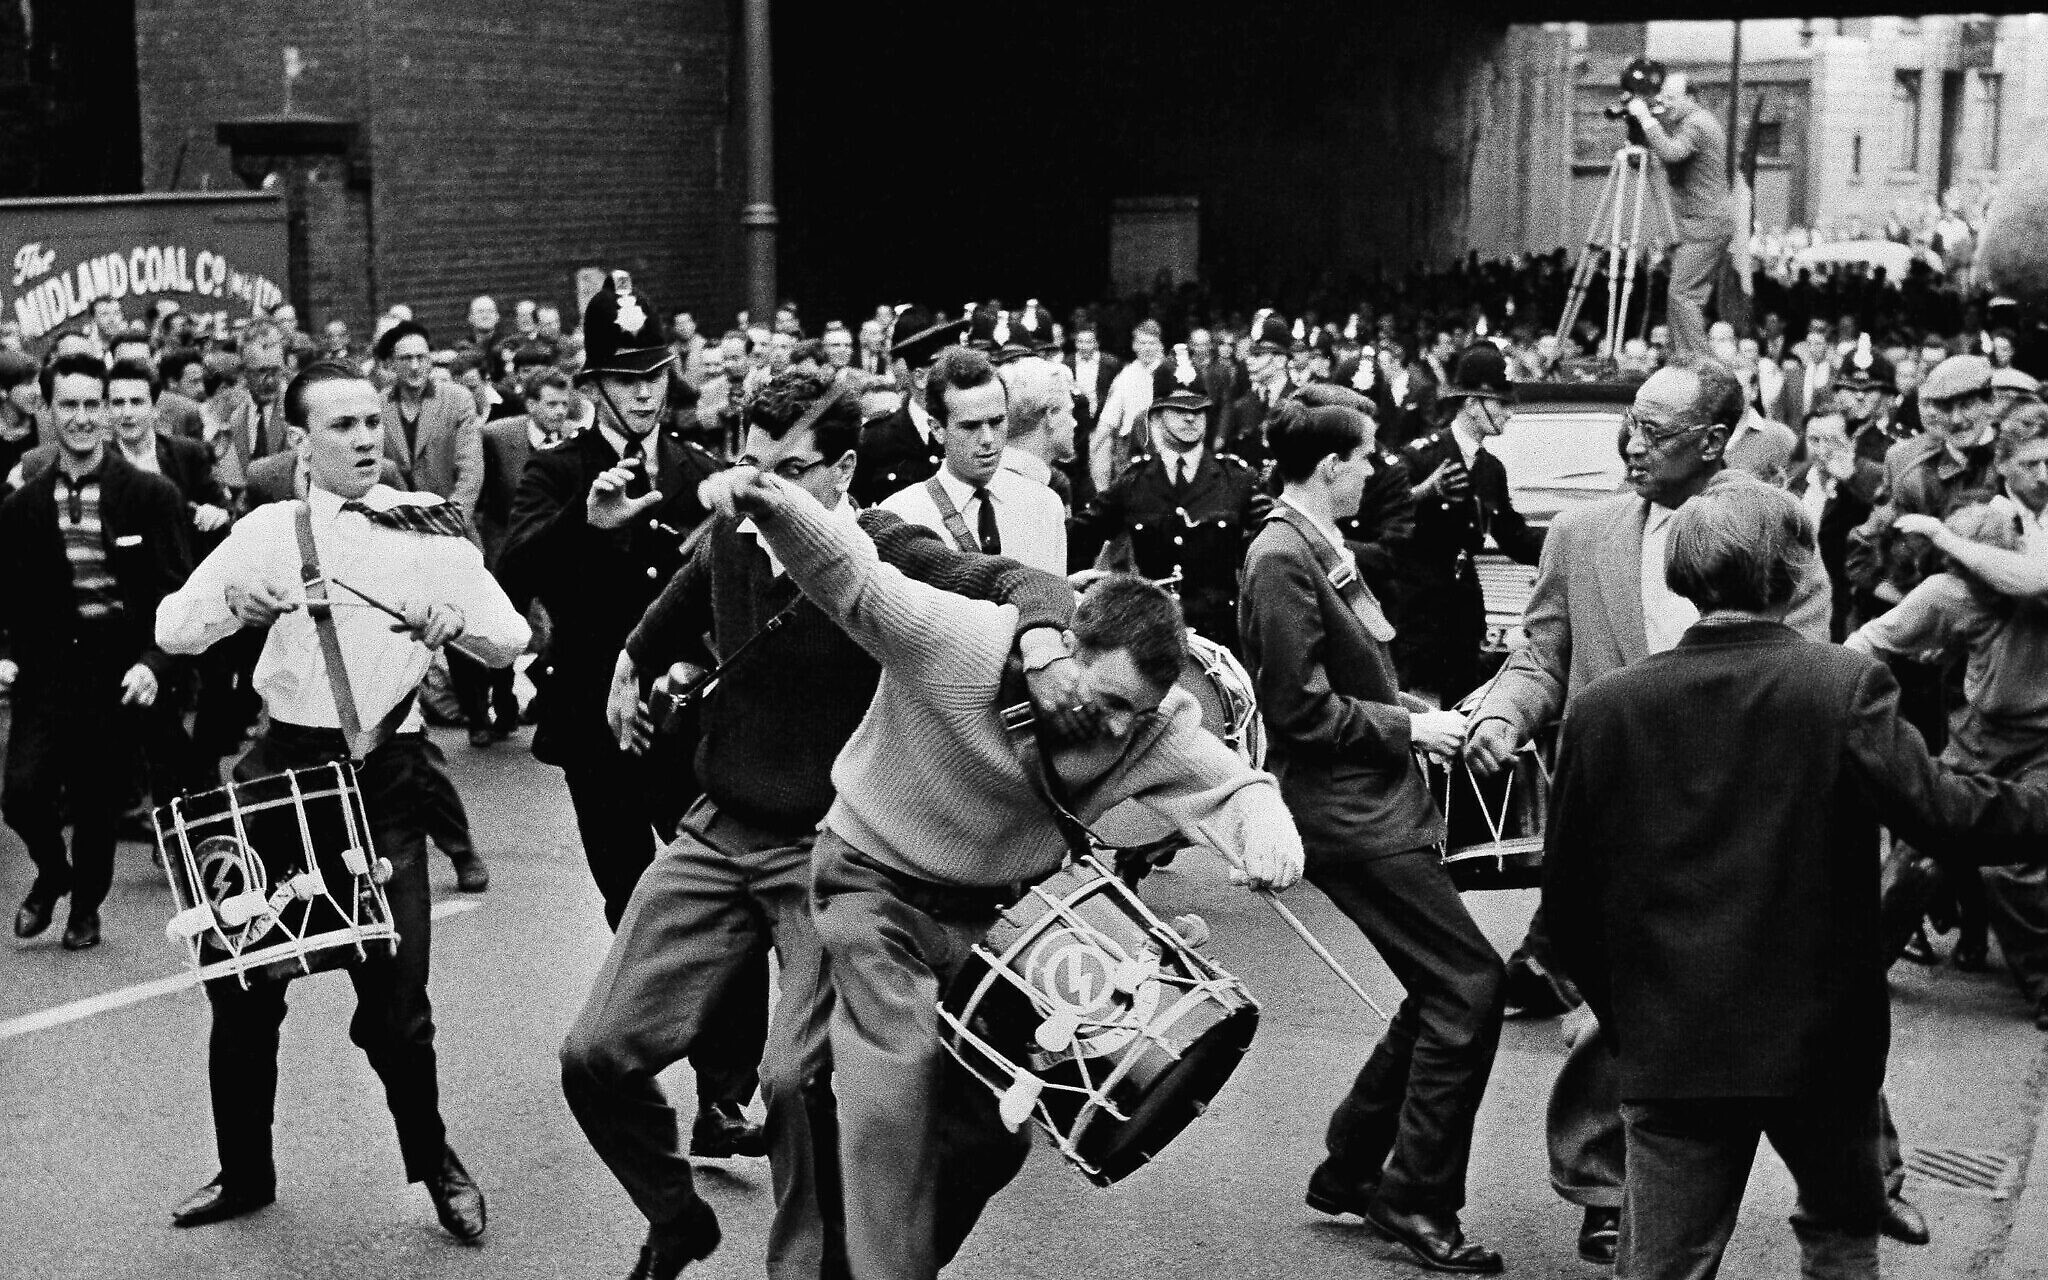 An irate spectator attacks a drummer of British fascist leader sir Oswald Mosley, leader of the extremist right-wing British union movement, during a march through Manchester, England on July 29, 1962. Rocks and tomatoes were hurtled towards some 40 marchers before they were physically attacked by the crowd. (AP Photo)